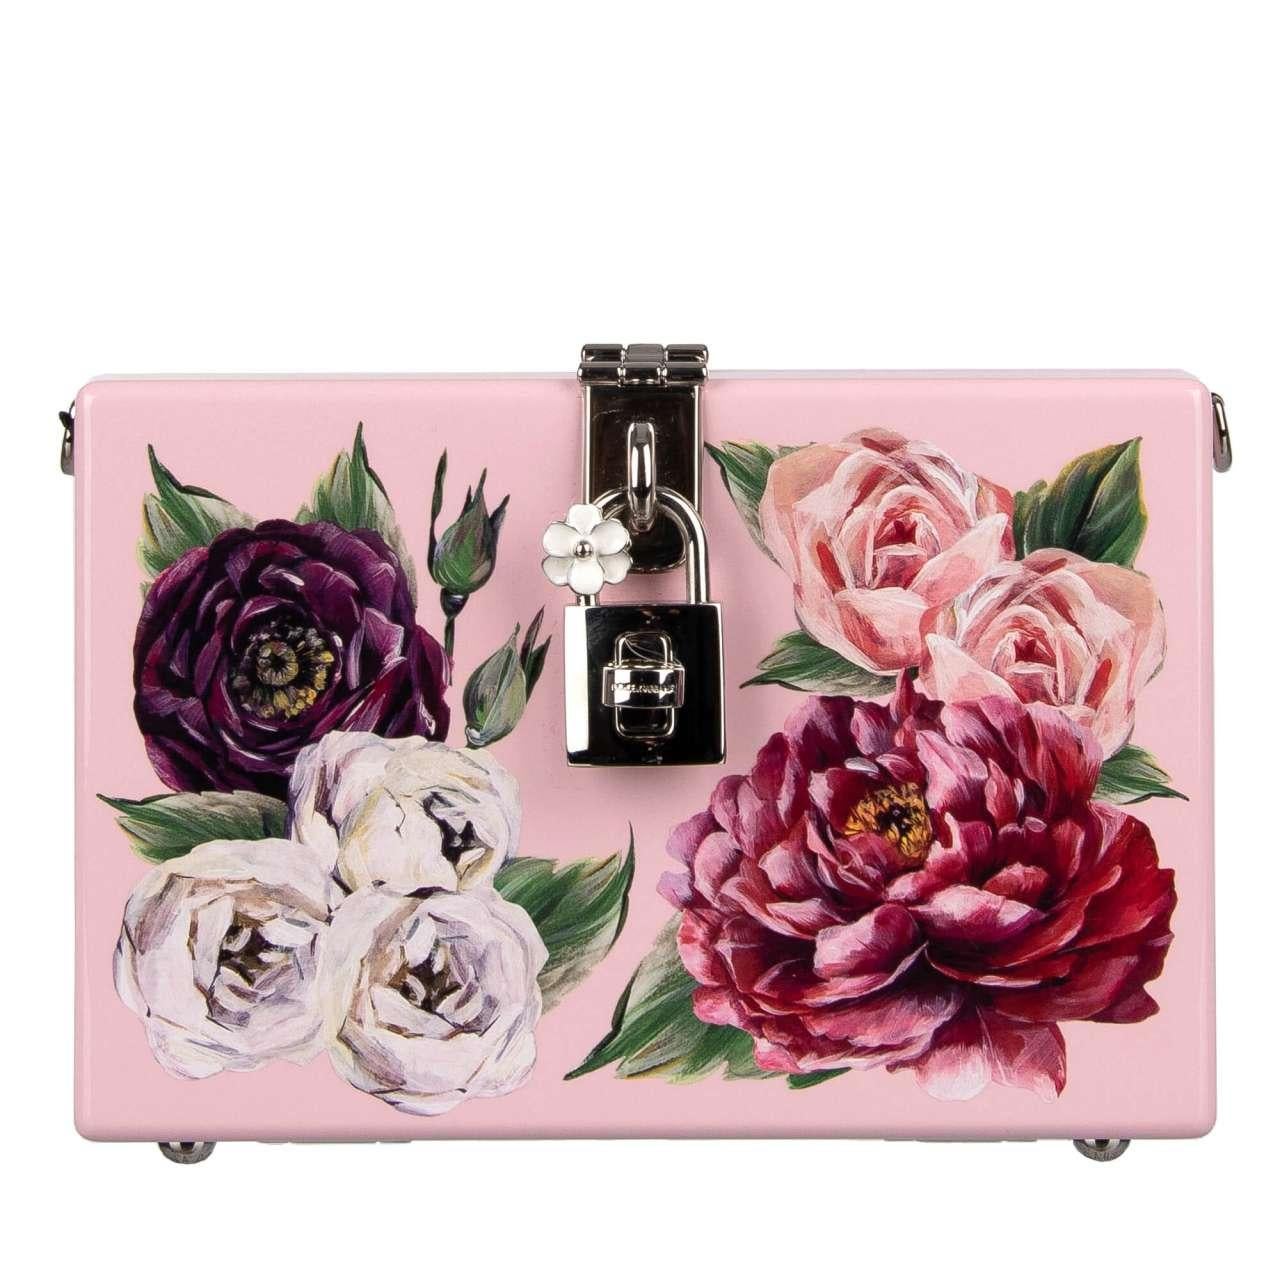 - Peony flowers printed shoulder bag / clutch DOLCE BOX with shoulder strap and decorative buckle with a flower by DOLCE & GABBANA - RUNWAY - Dolce & Gabbana Fashion Show - New without Tag; with Dustbag and Authenticity Card - Former RRP: EUR 2.150